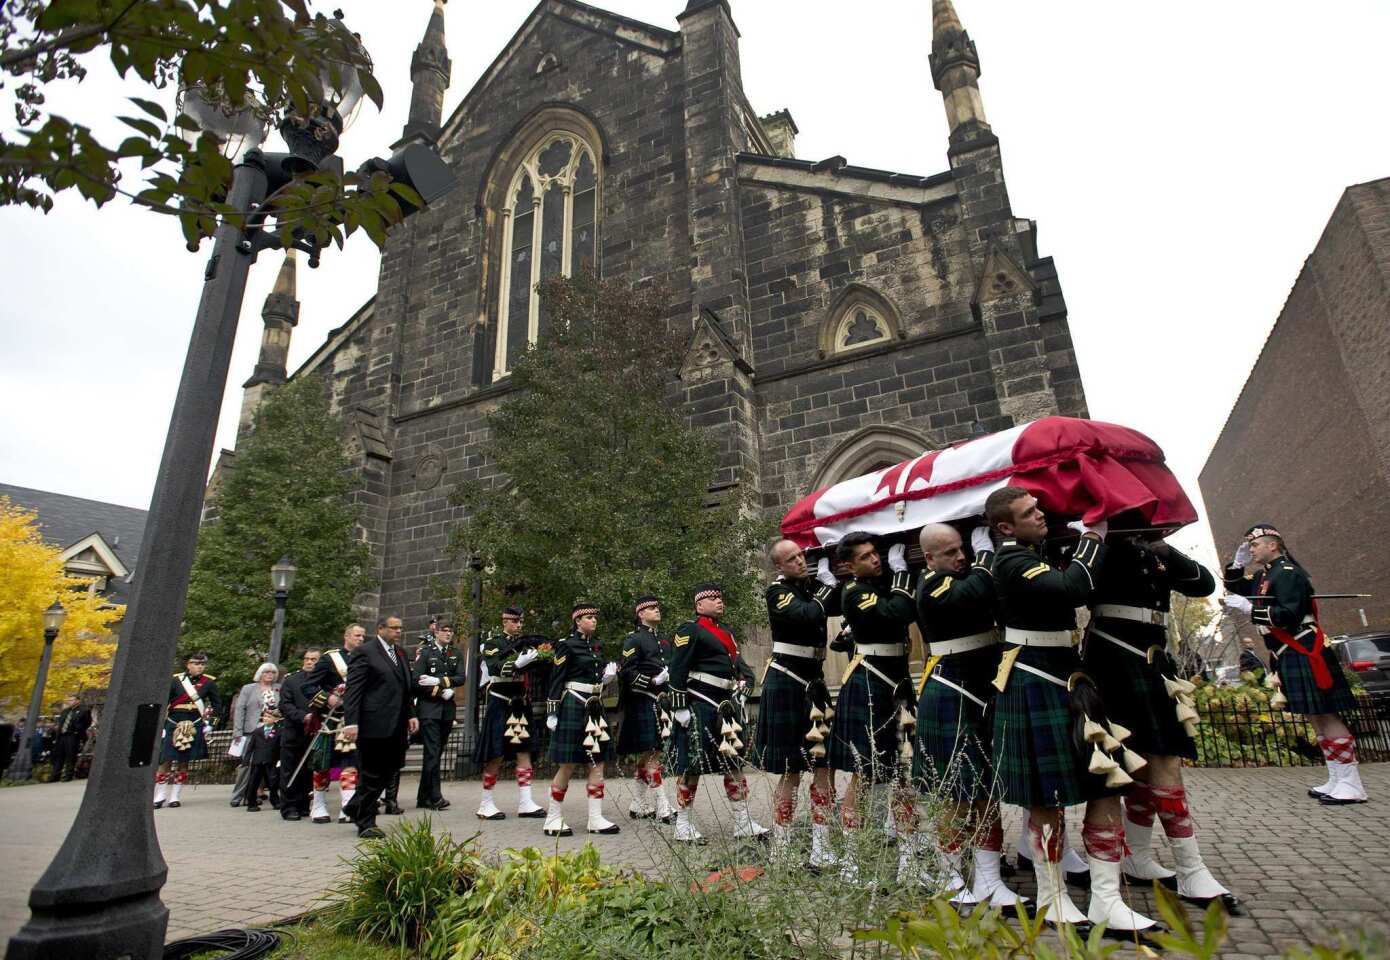 The coffin of Cpl. Nathan Cirillo is carried by pallbearers at his regimental funeral service in Hamilton, Ontario